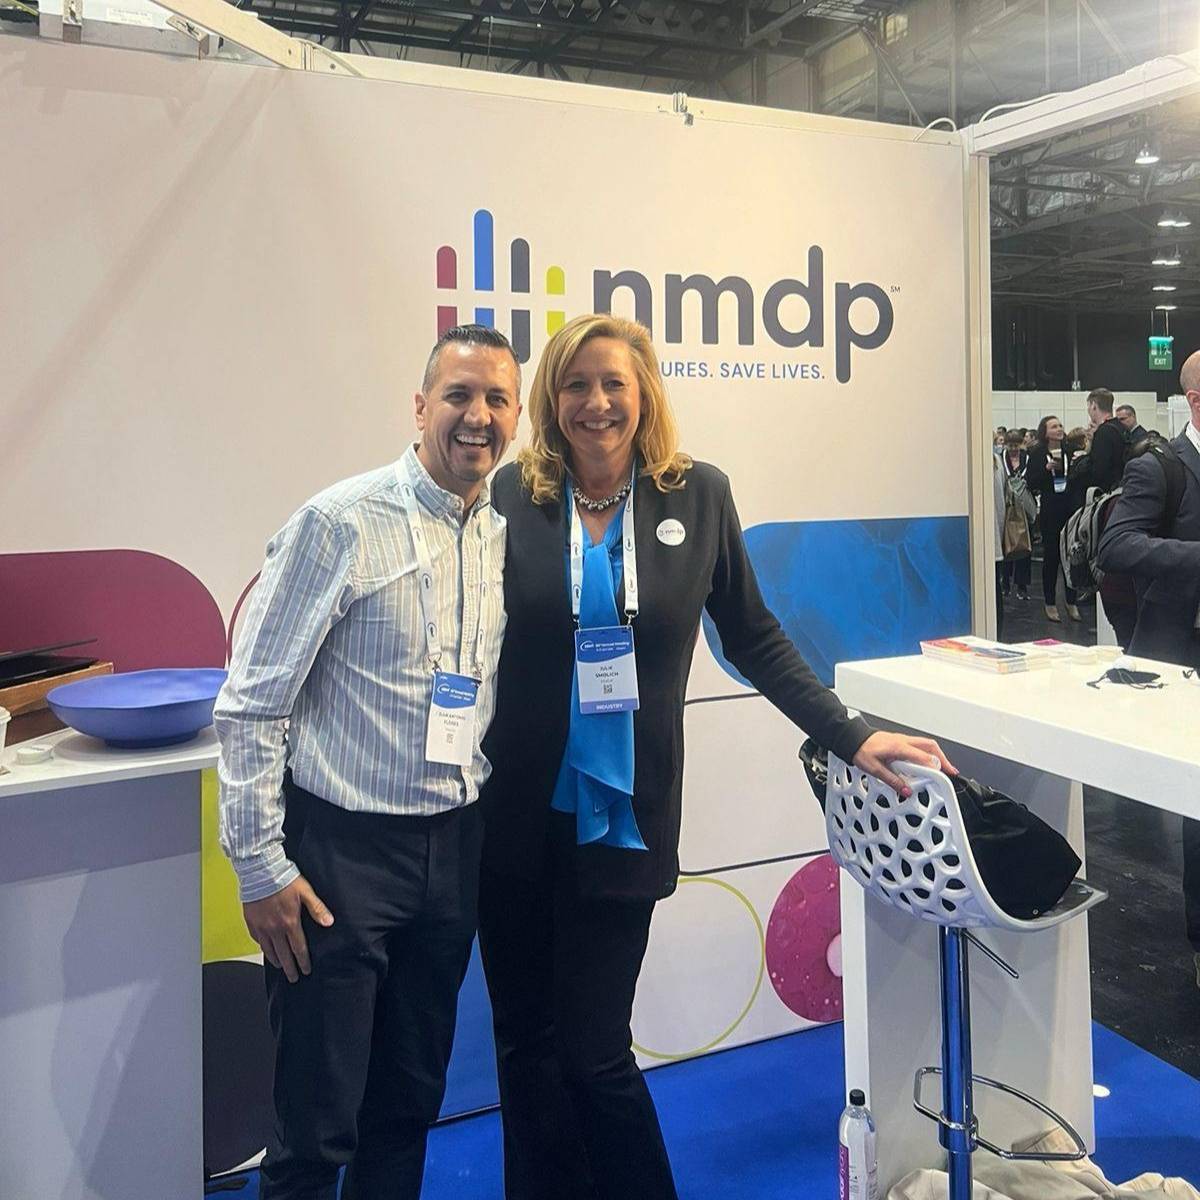 👋 Another day is in full swing at #EBMT24! Stop by booth E35 to find out more about how we're active throughout the entire #celltherapy ecosystem.